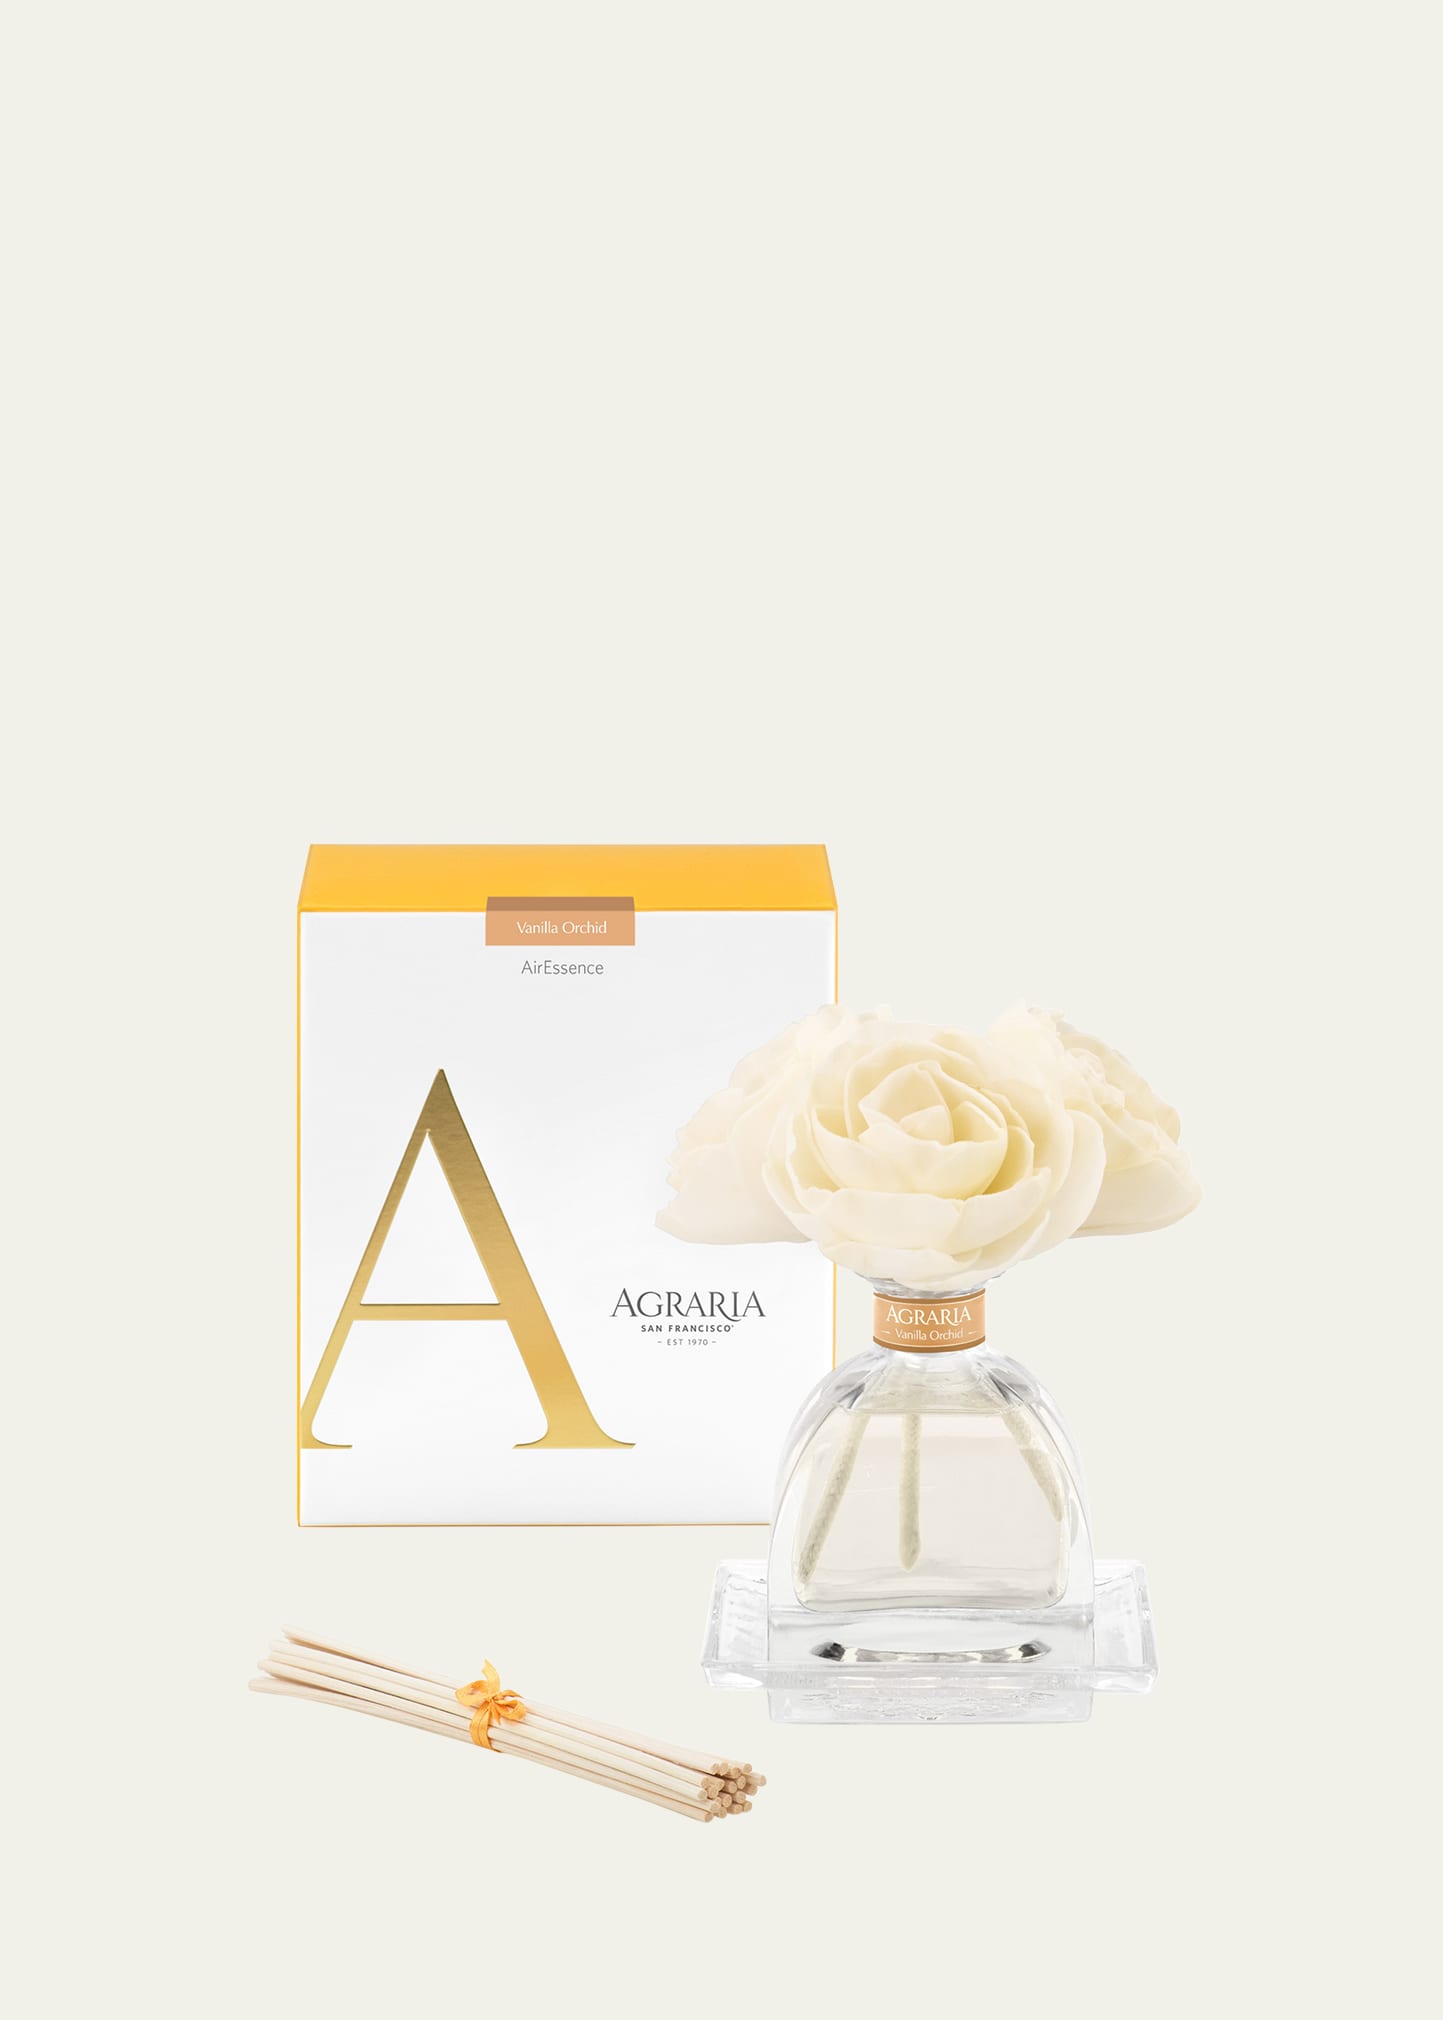 Agraria Airessence Vanilla Orchid, 7.4 Oz. In White